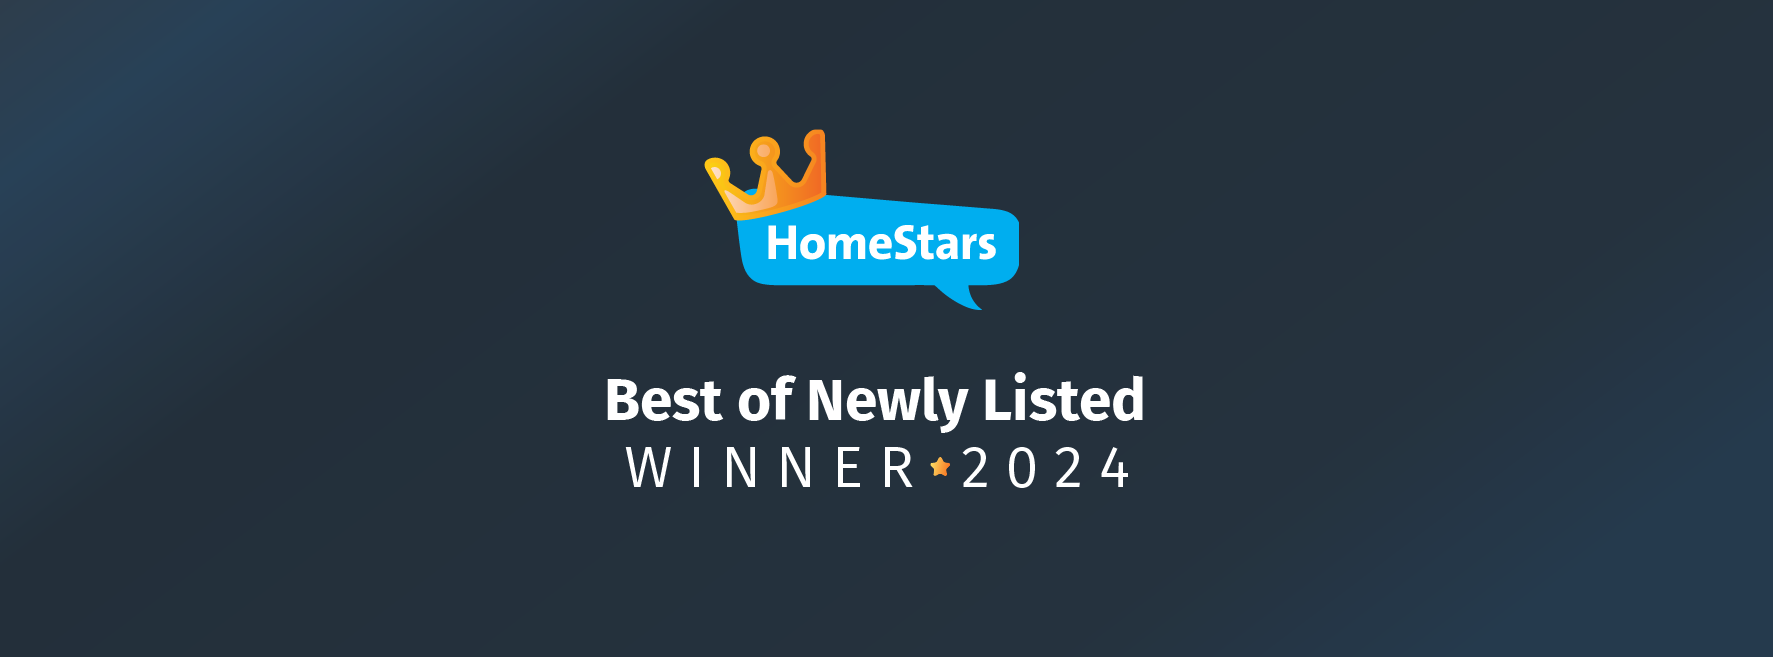 Best of Newly Listed 2024 Award from Homestars